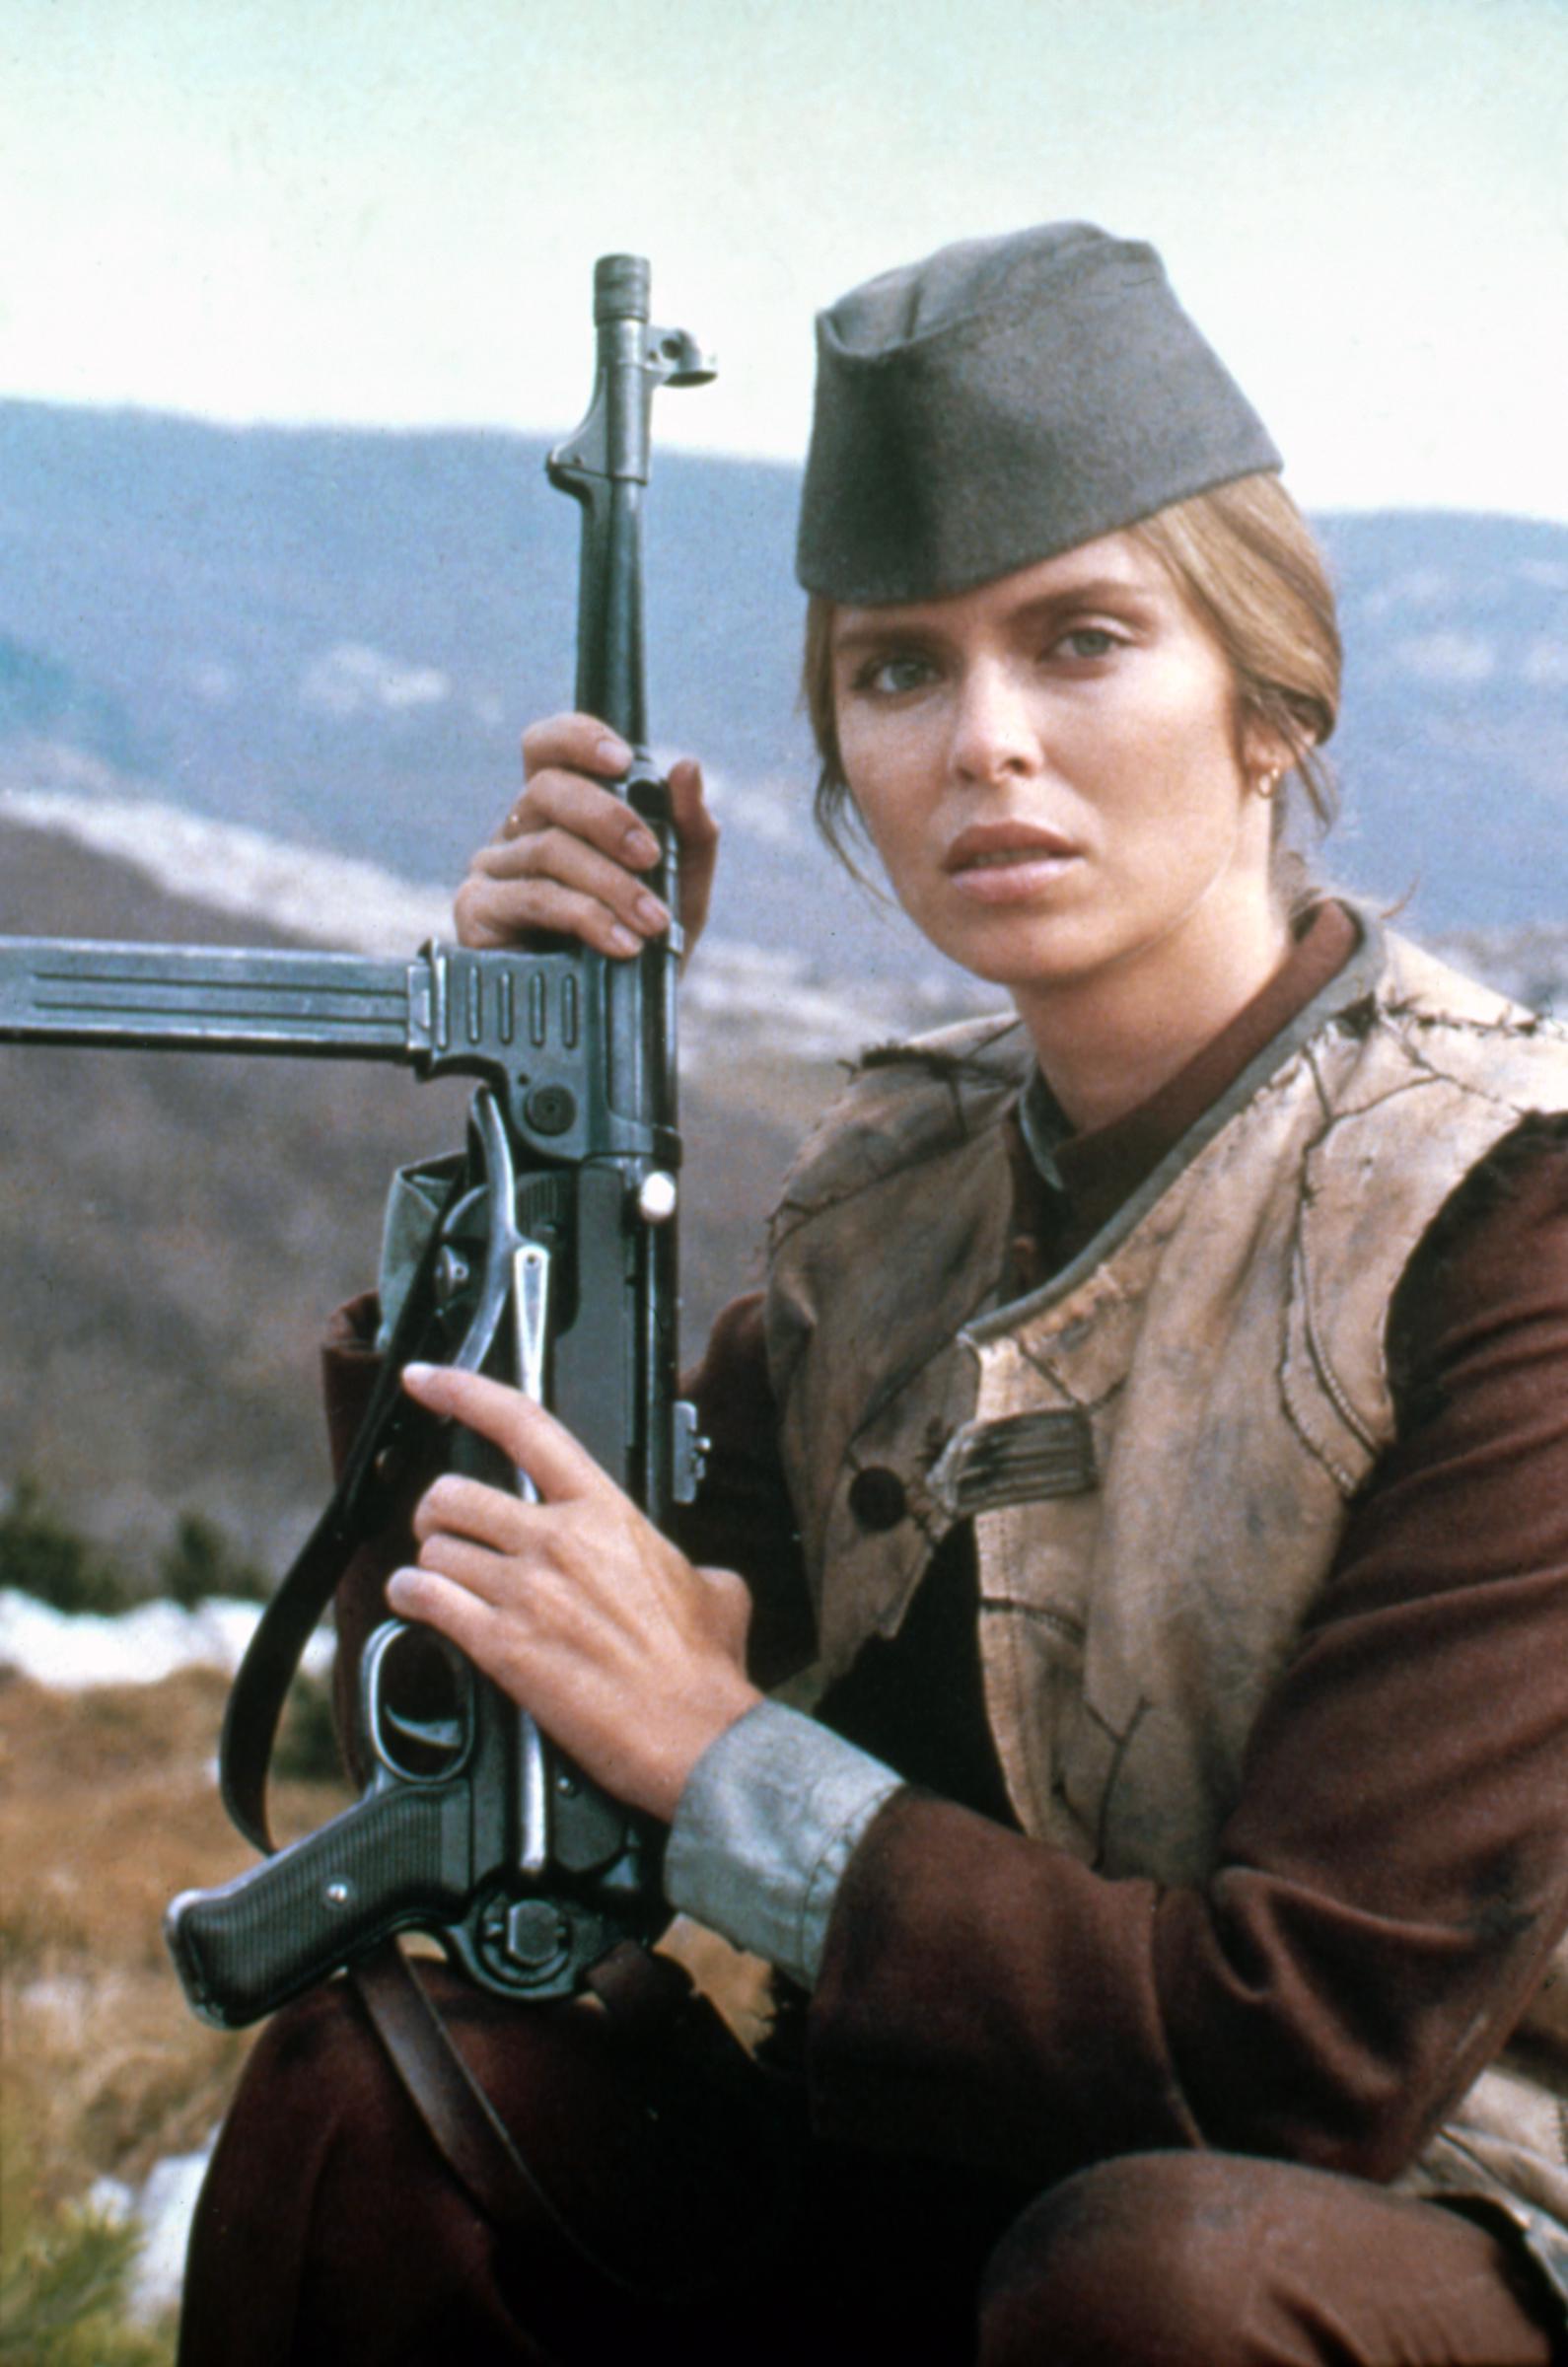 Barbara Bach on the set of "Force 10 from Navarone" directed by Guy Hamilton in 1978. | Source: Getty Images